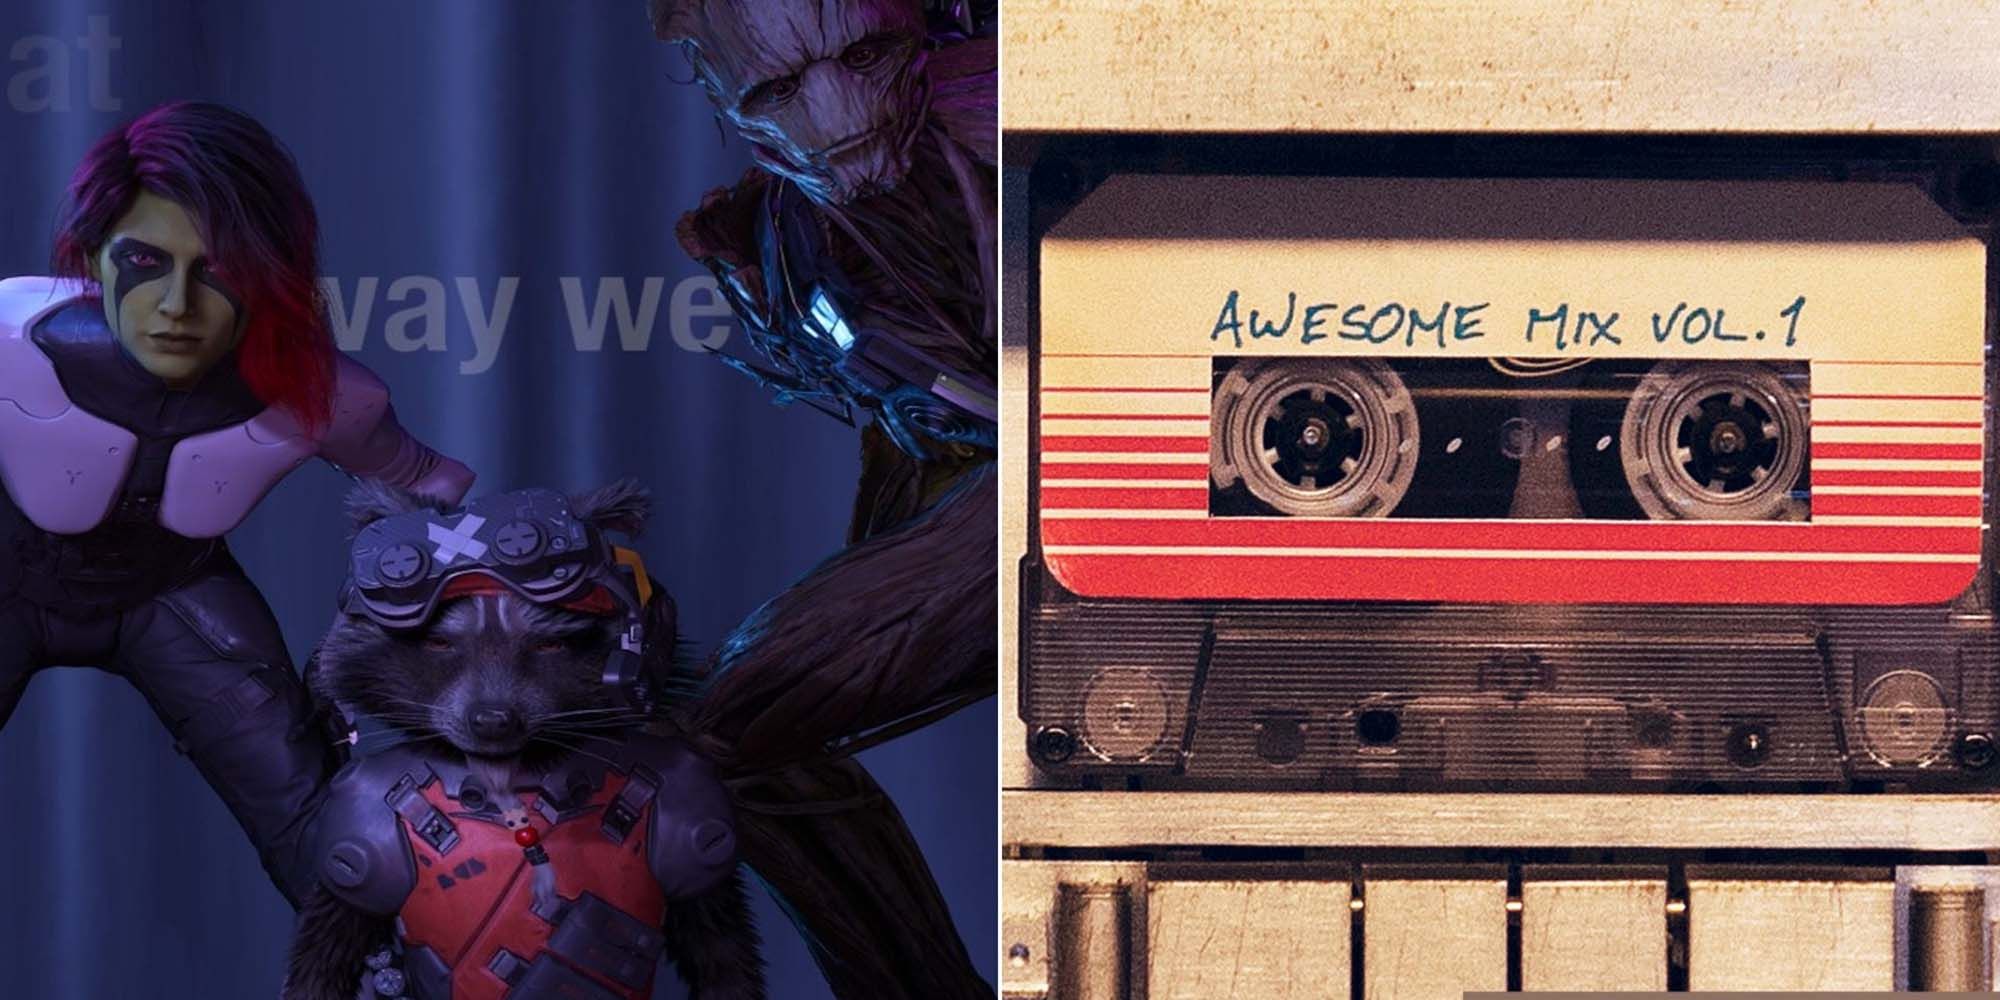 Marvel’s Guardians of the Galaxy guardians from game and awesome mix vol 1 from mcu